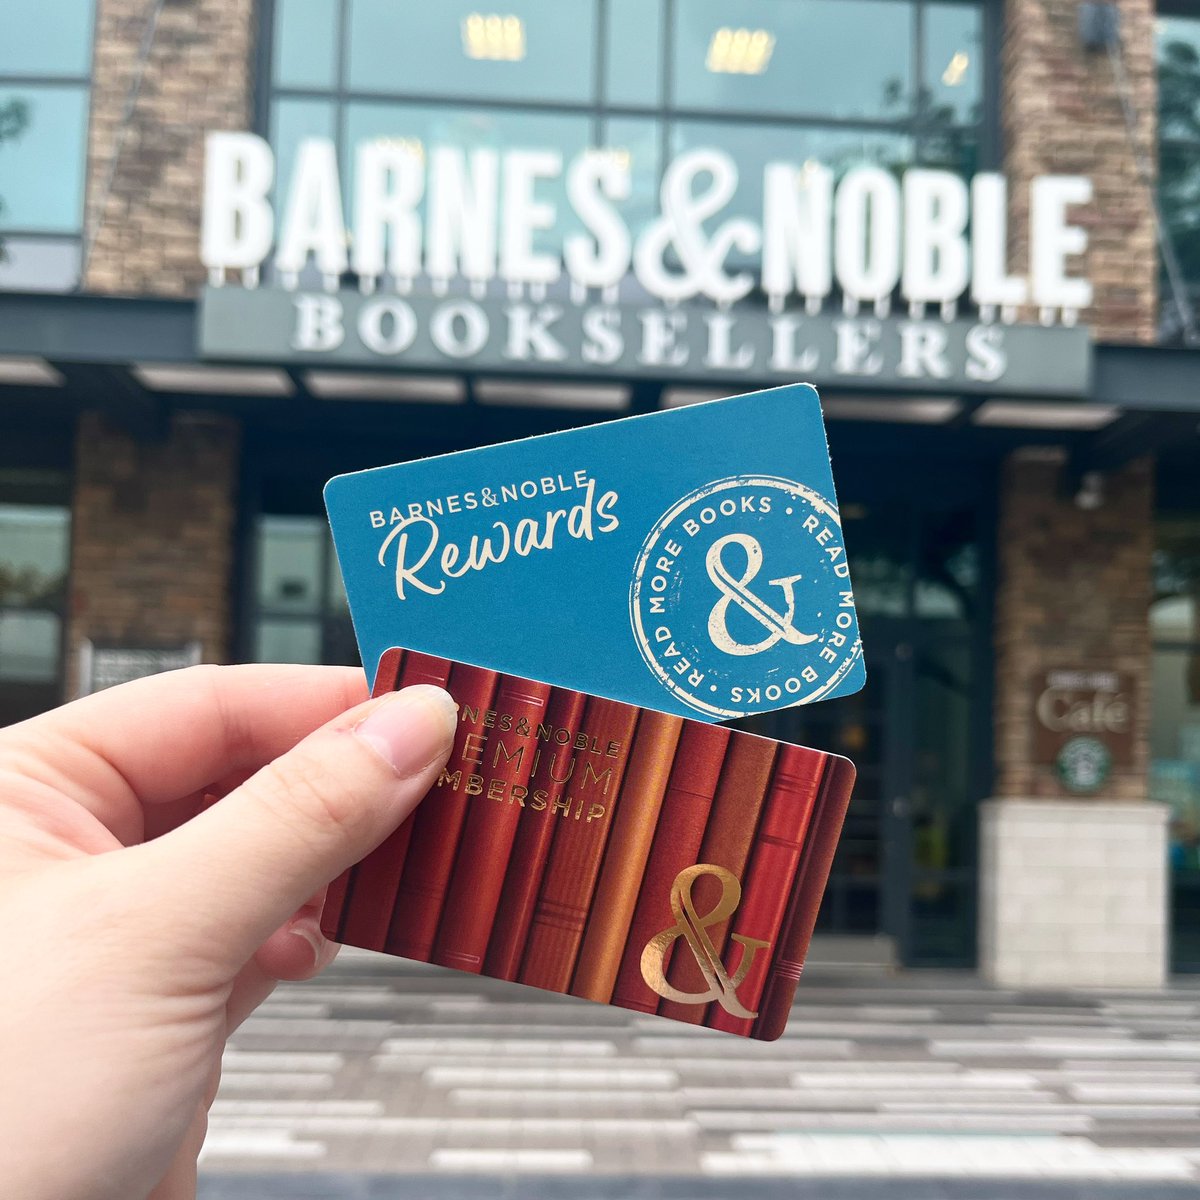 Let the Ex-stamp-aganza begin! From today 7/1-7/14 premium members will receive TRIPLE stamps on every purchase! Rewards members, don’t worry, we didn’t forget about you—you’re getting DOUBLE stamps, too! Not a member yet? We’re happy to sign you up! Just ask a bookseller how.